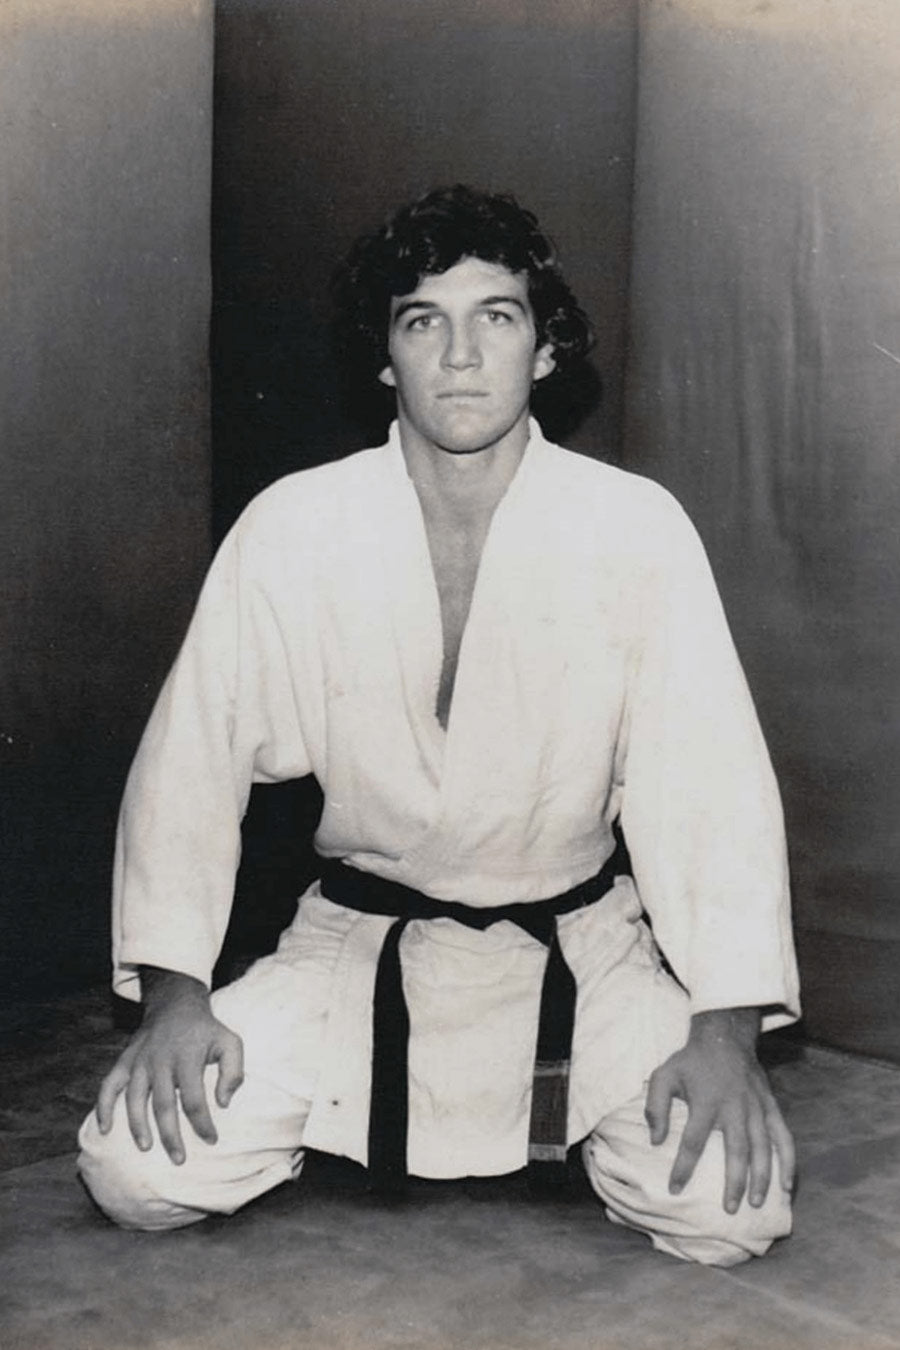 Rolls, Rickson, or Roger Gracie - Who Was The Best?